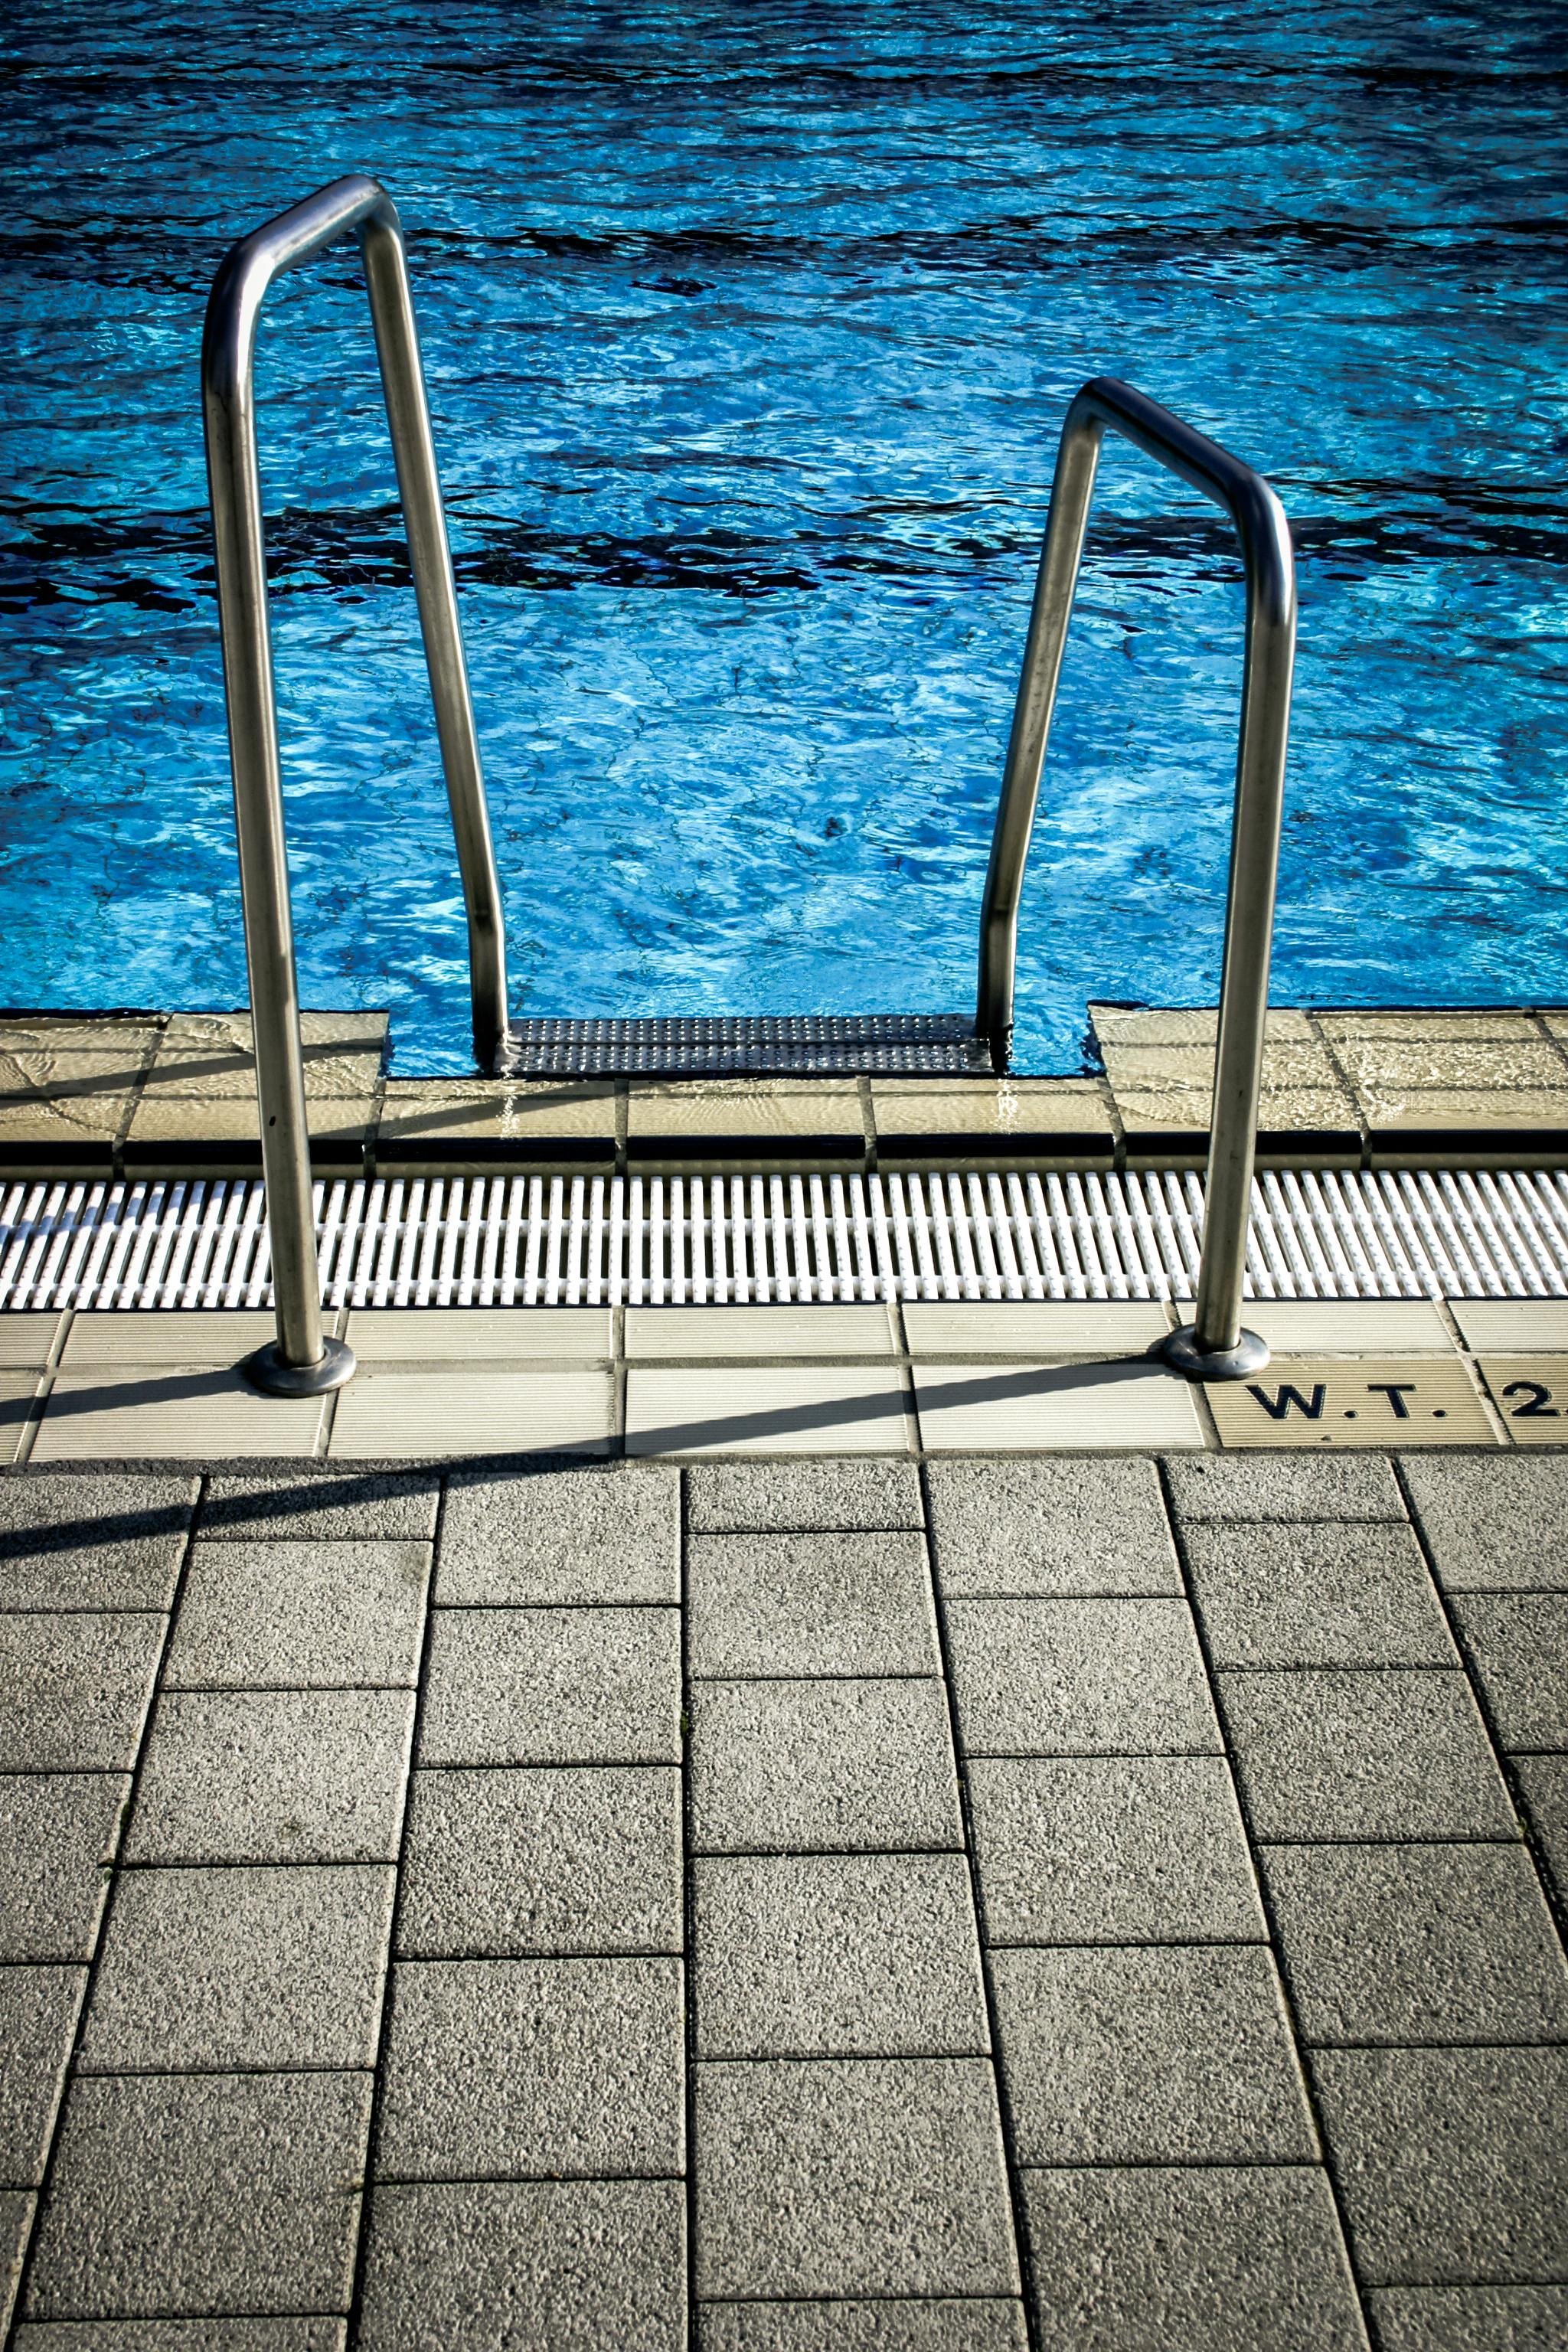 20+ Swimming Pool Pictures | Download Free Images & Stock Photos on Unsplash